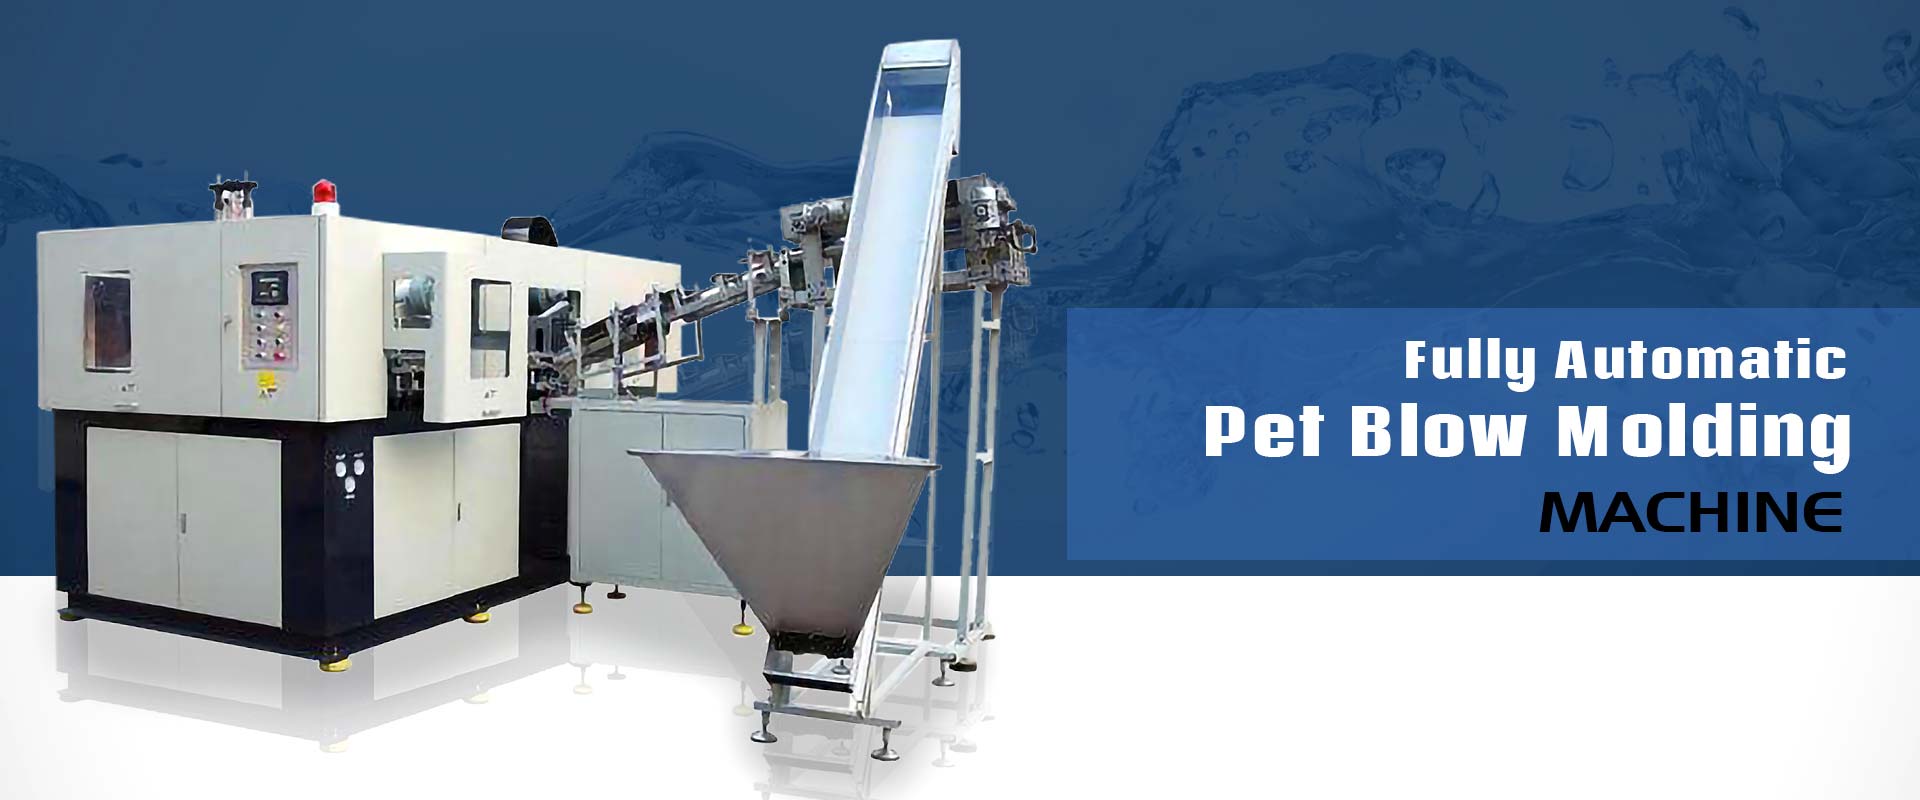 Fully Automatic Pet Blow Molding Machine In Karoi